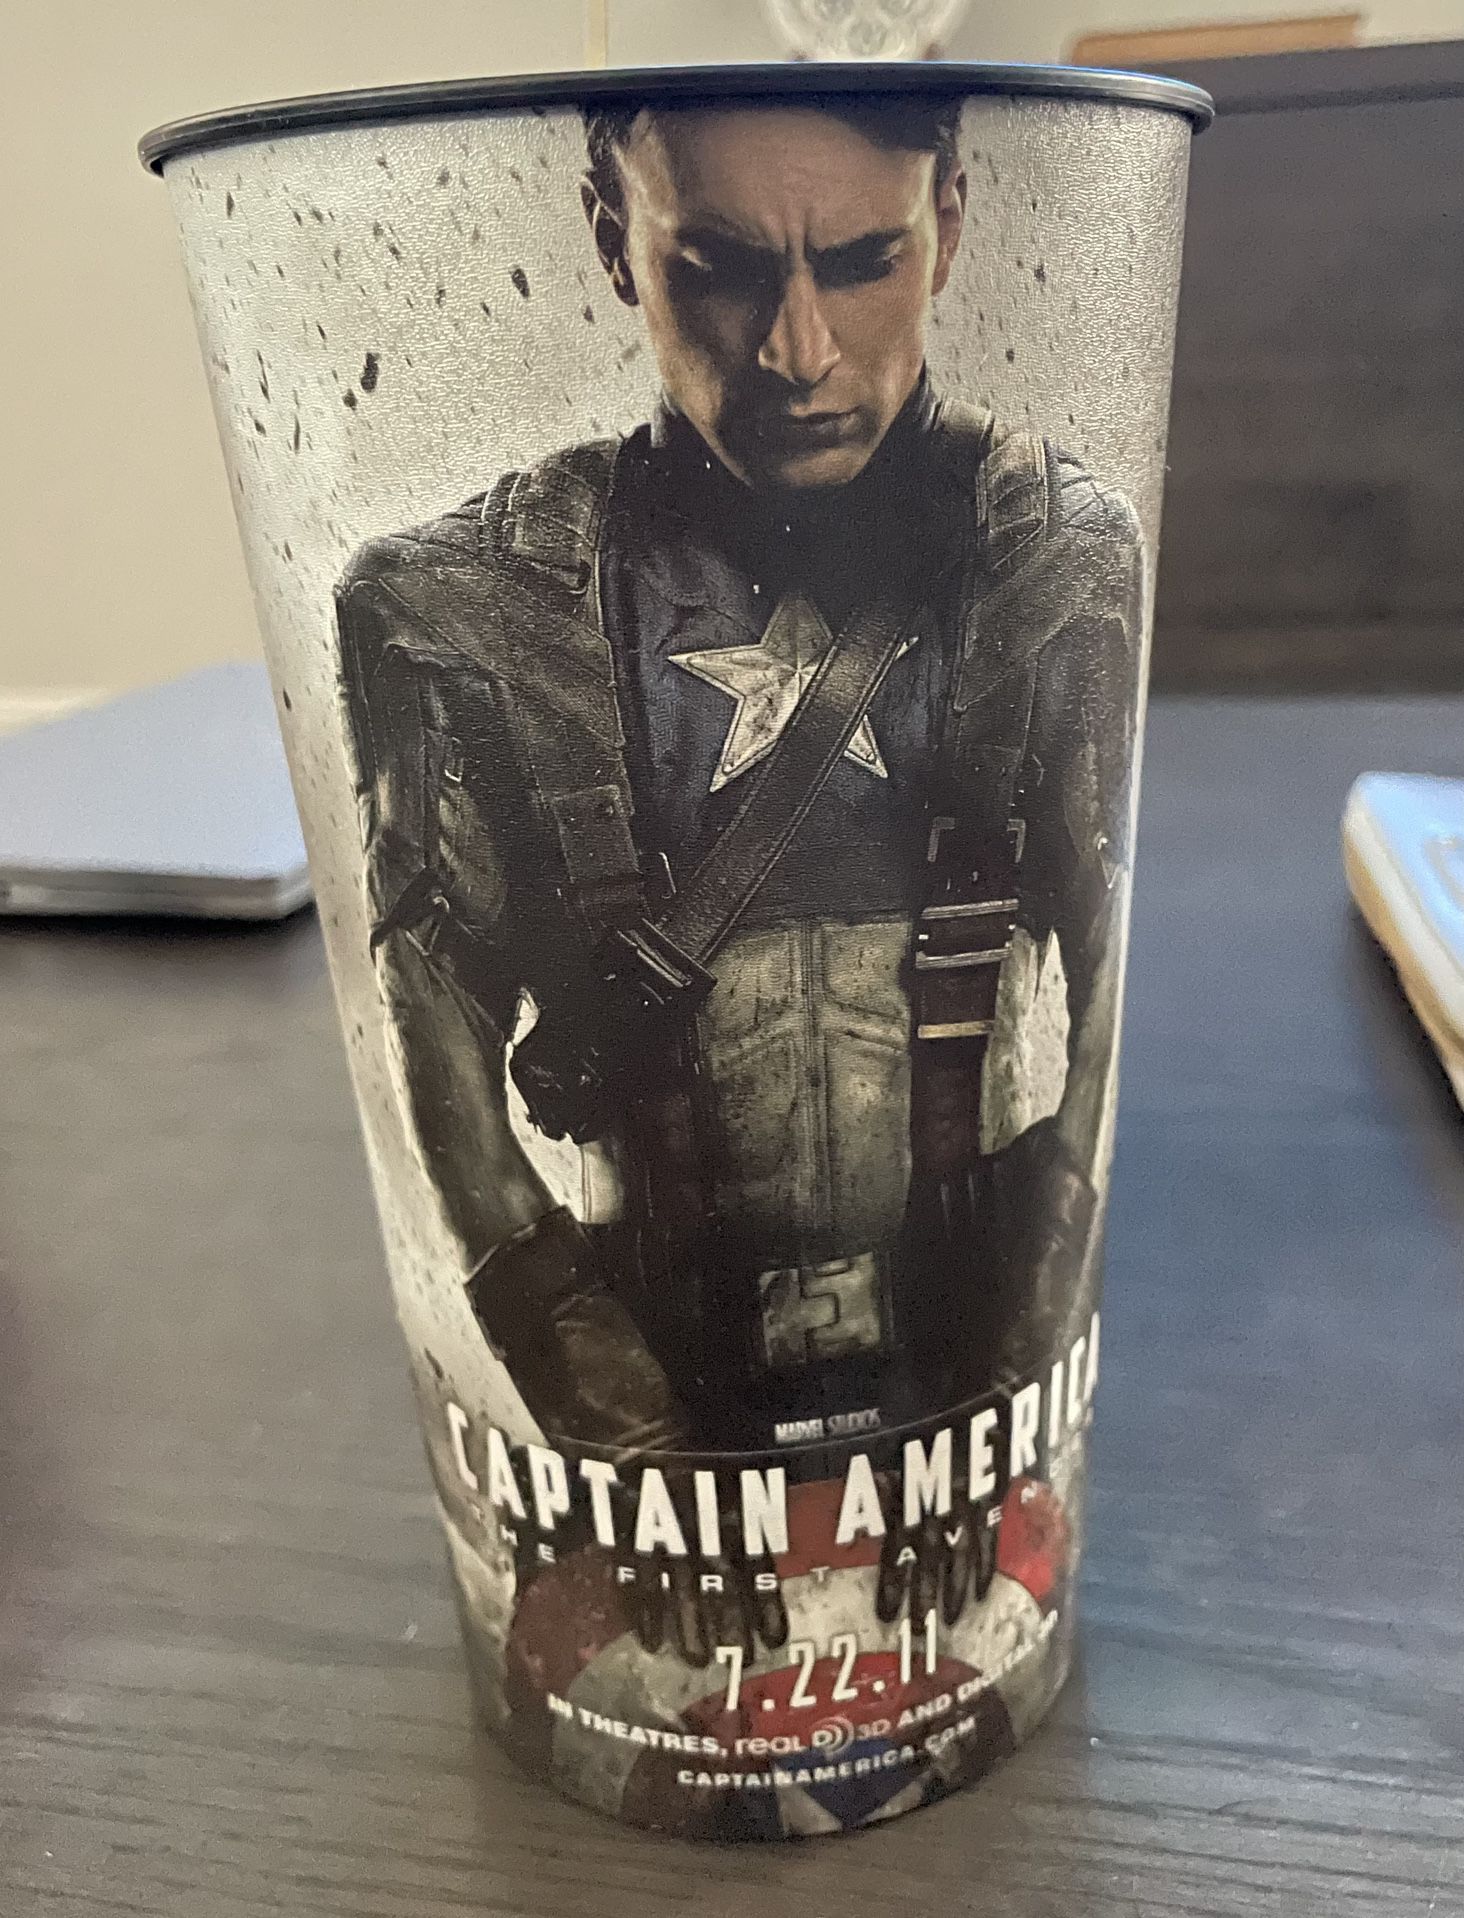 Captain America Movie Theater Promotional Cup